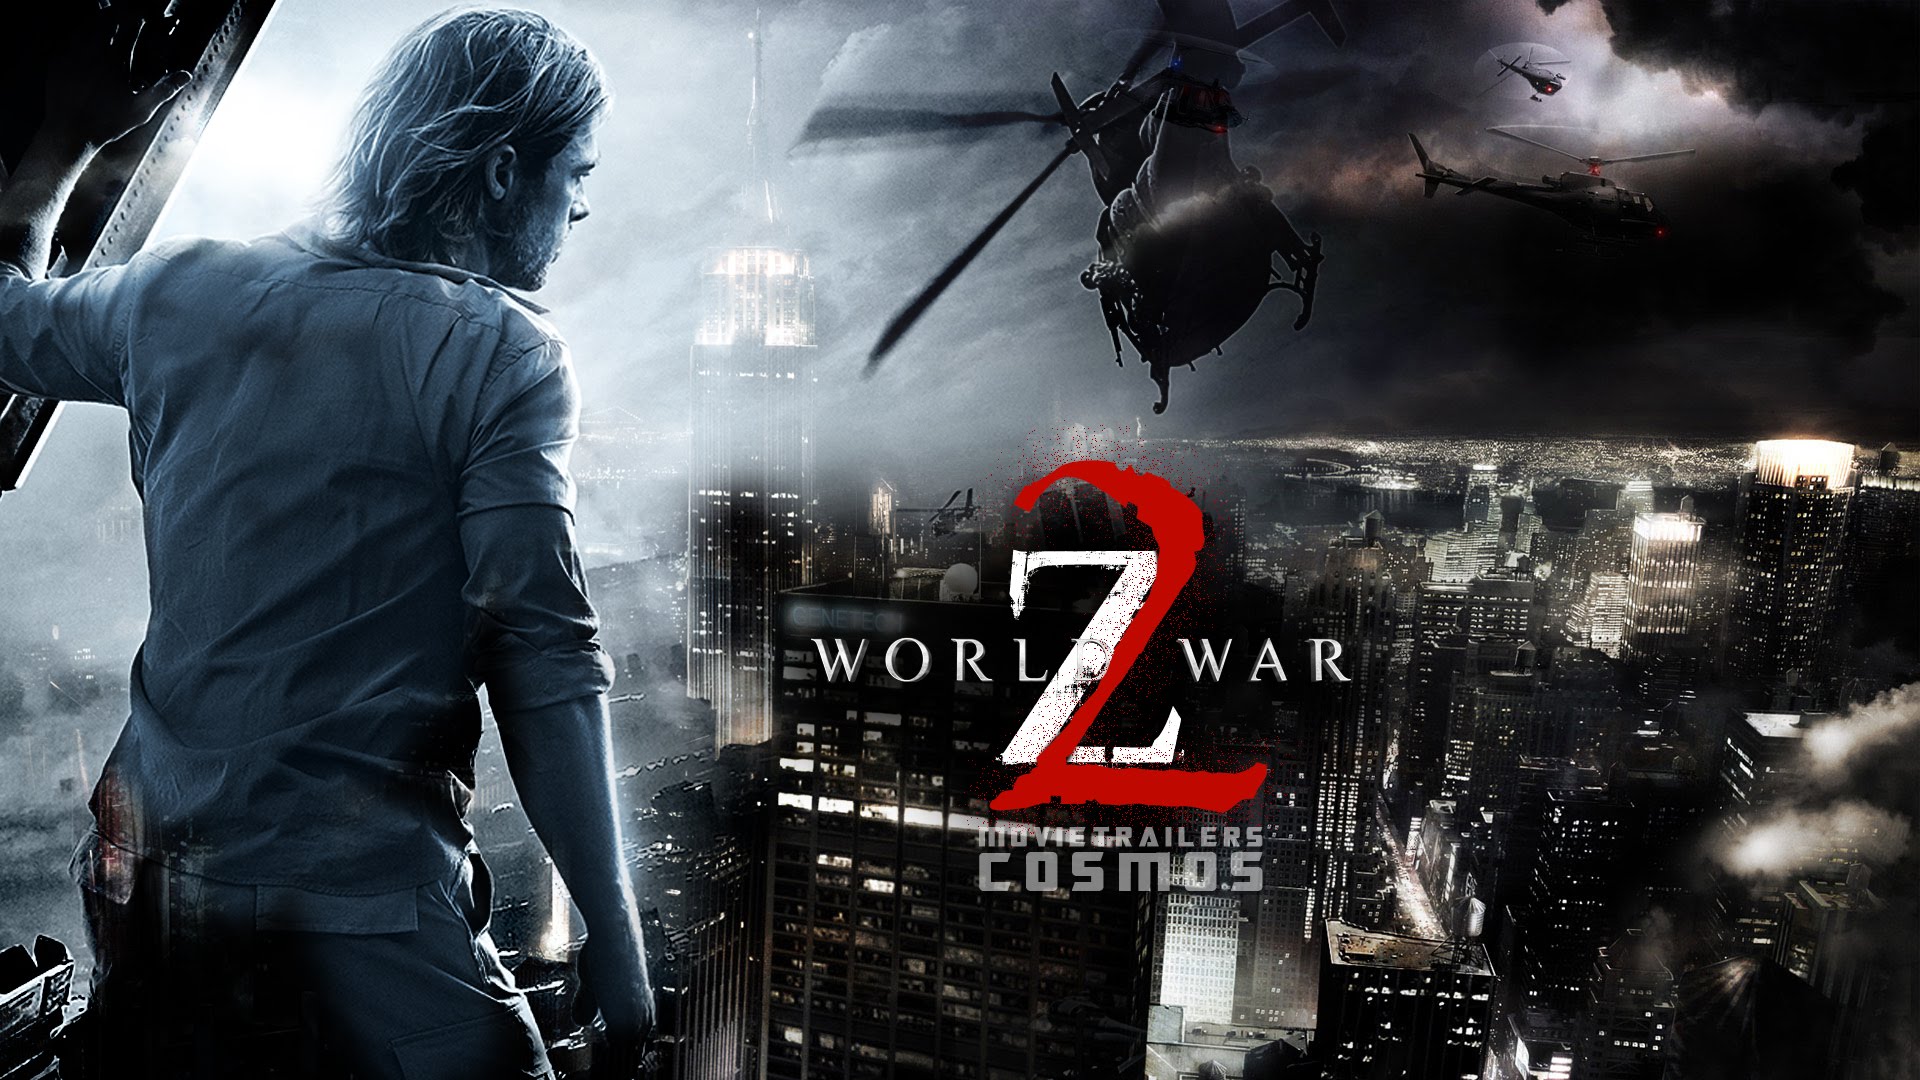 Download World War Z Wallpaper Hd Hd Wallpapers Book Your 1 Source For Free Download Hd 4k High Quality Wallpapers